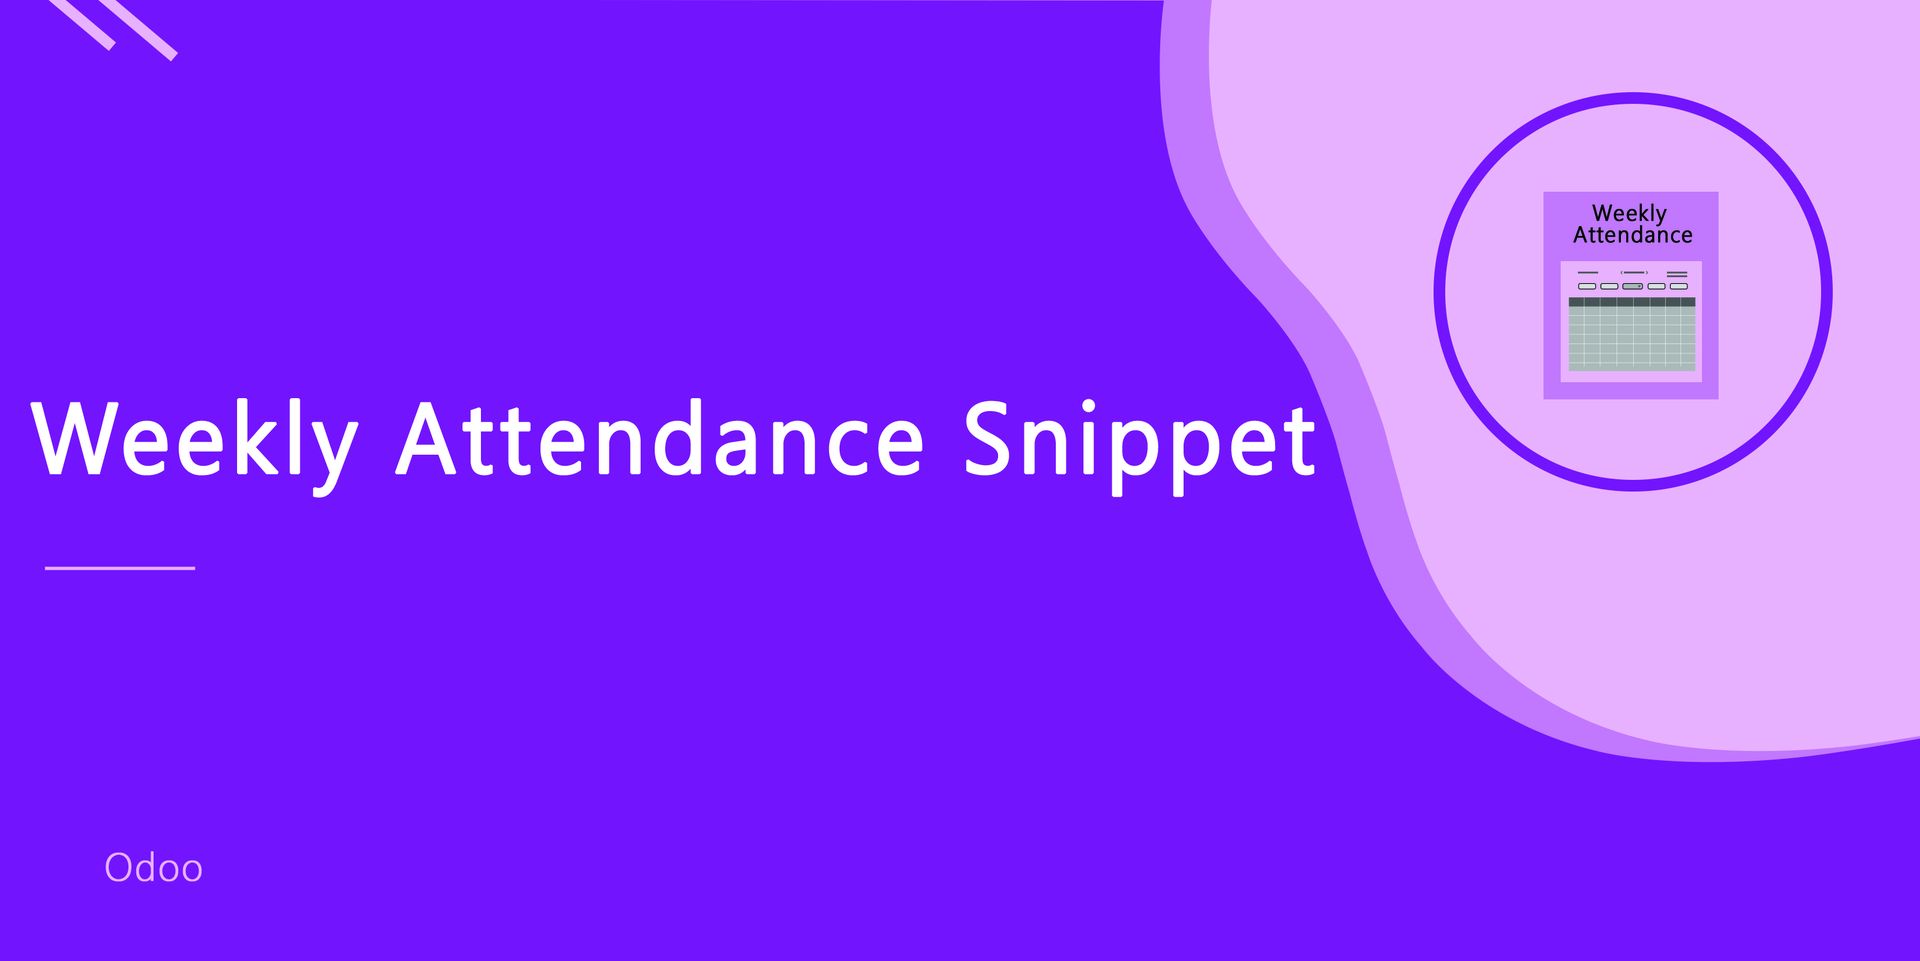 Weekly Attendance Snippet